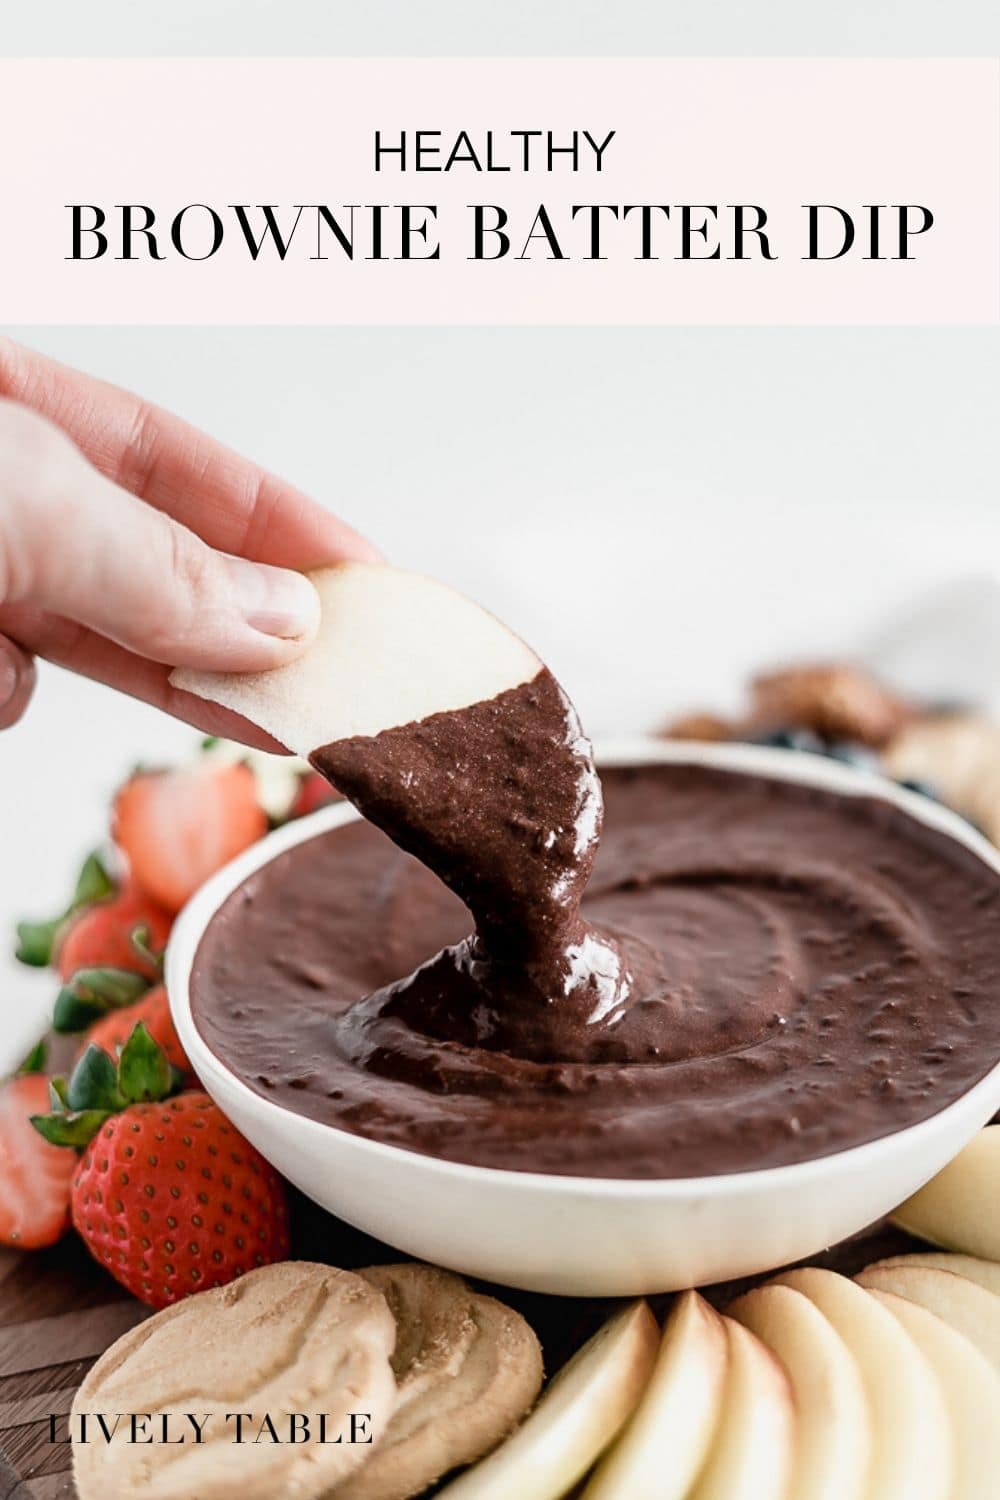 Healthy Brownie Batter Dessert Dip - Lively Table